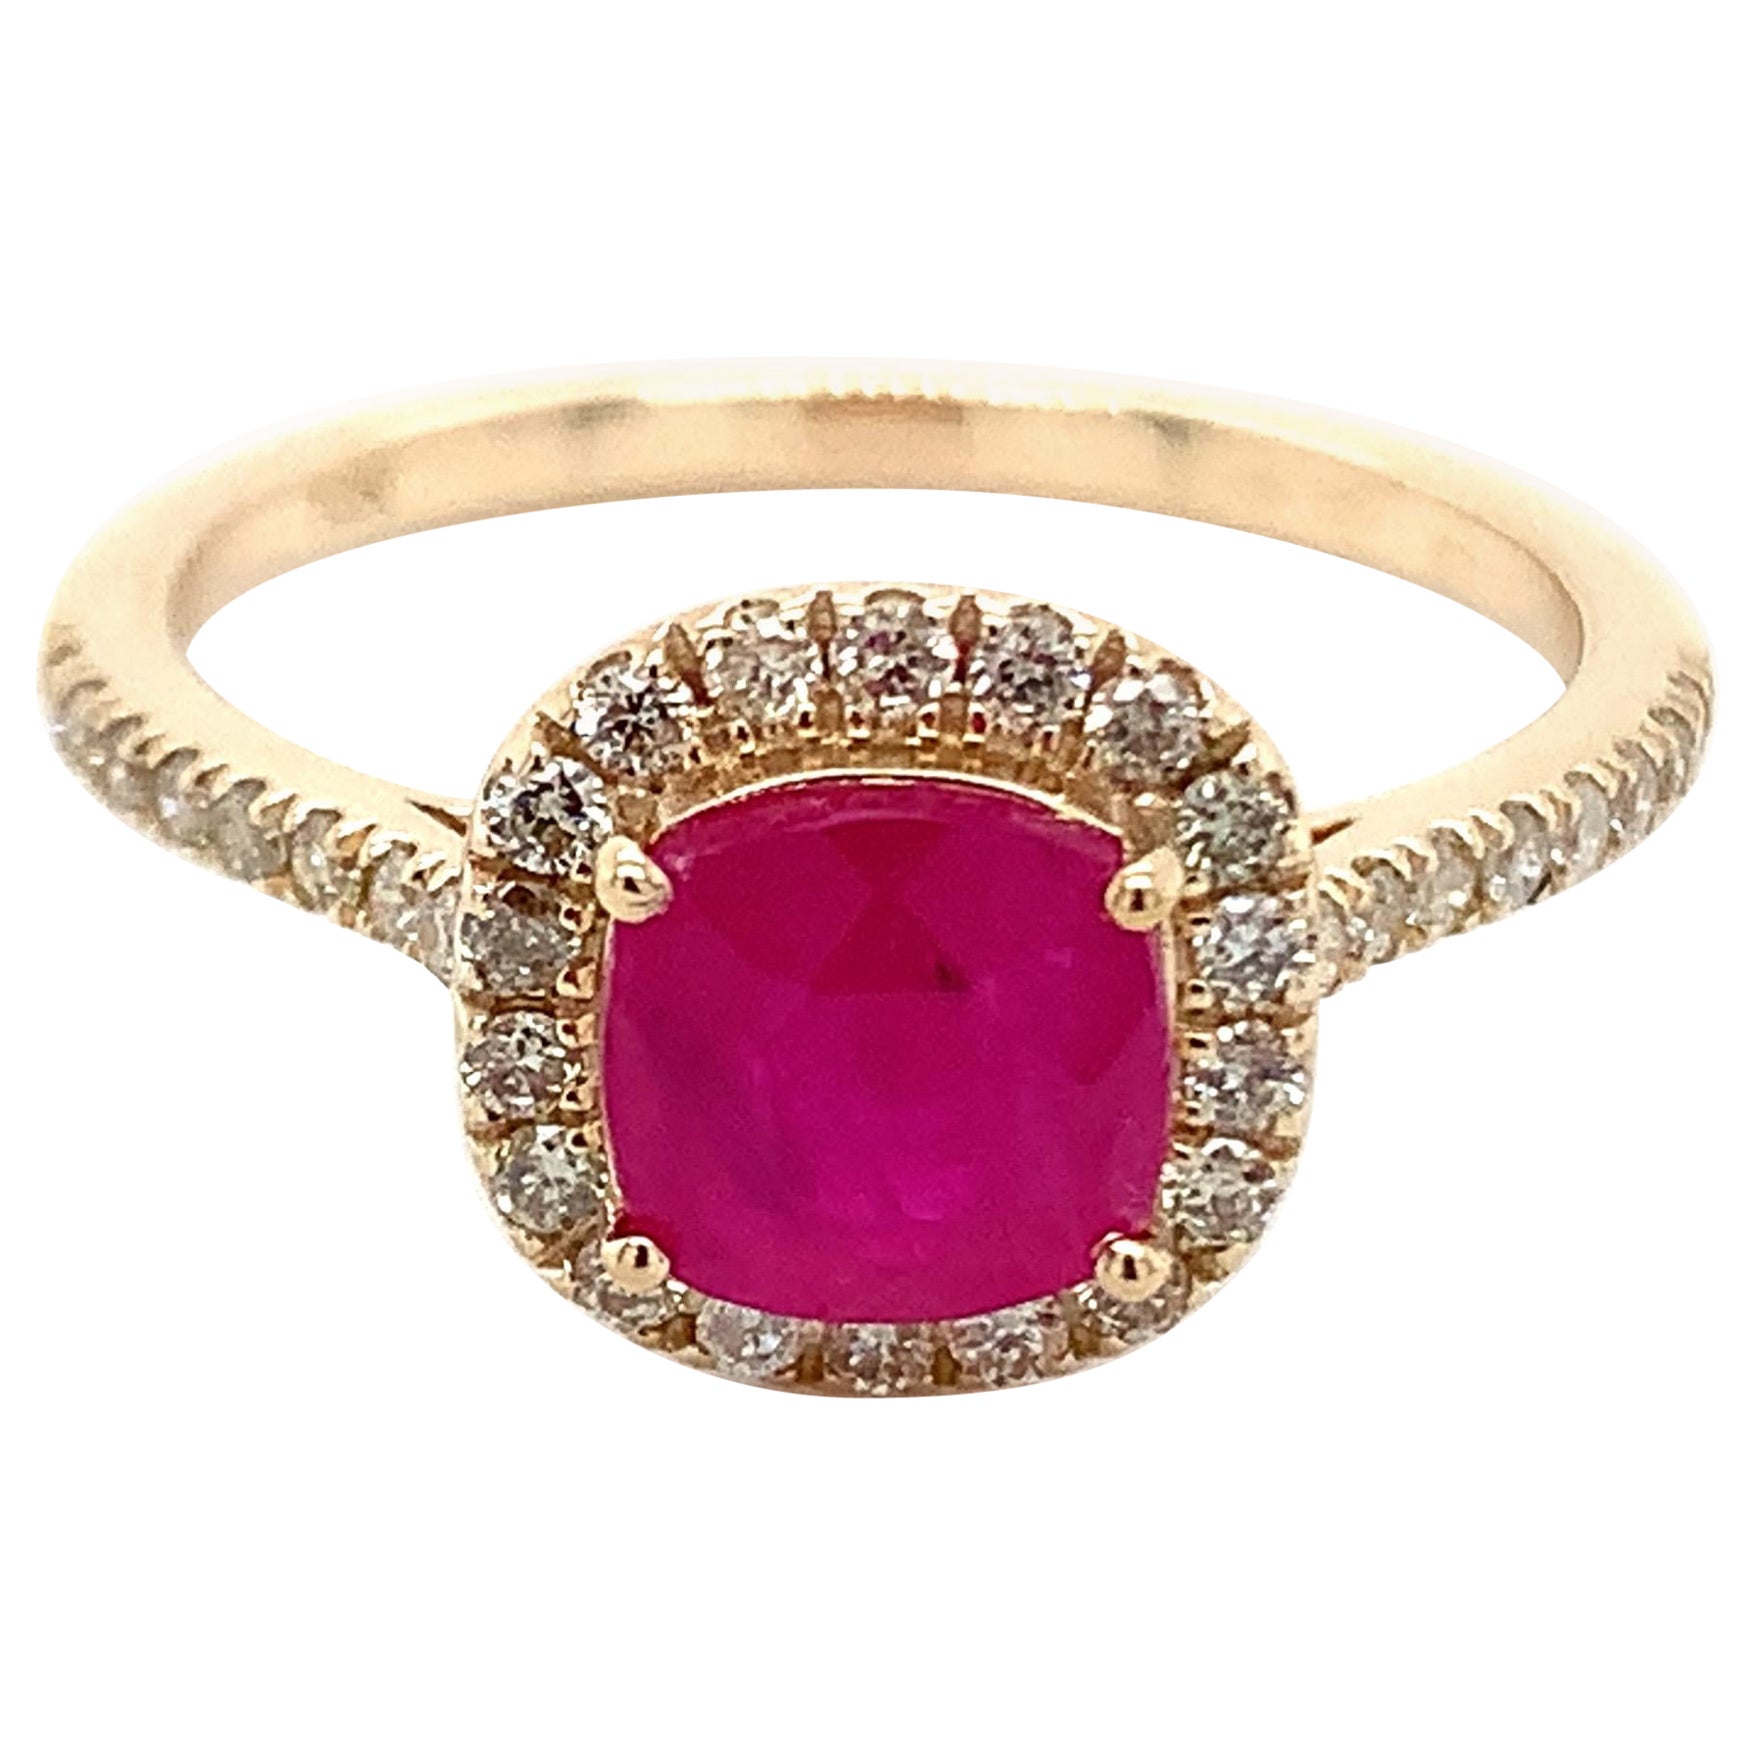 1.25 Carat Cushion Shape Ruby Ring with Diamonds in 10k Yellow Gold